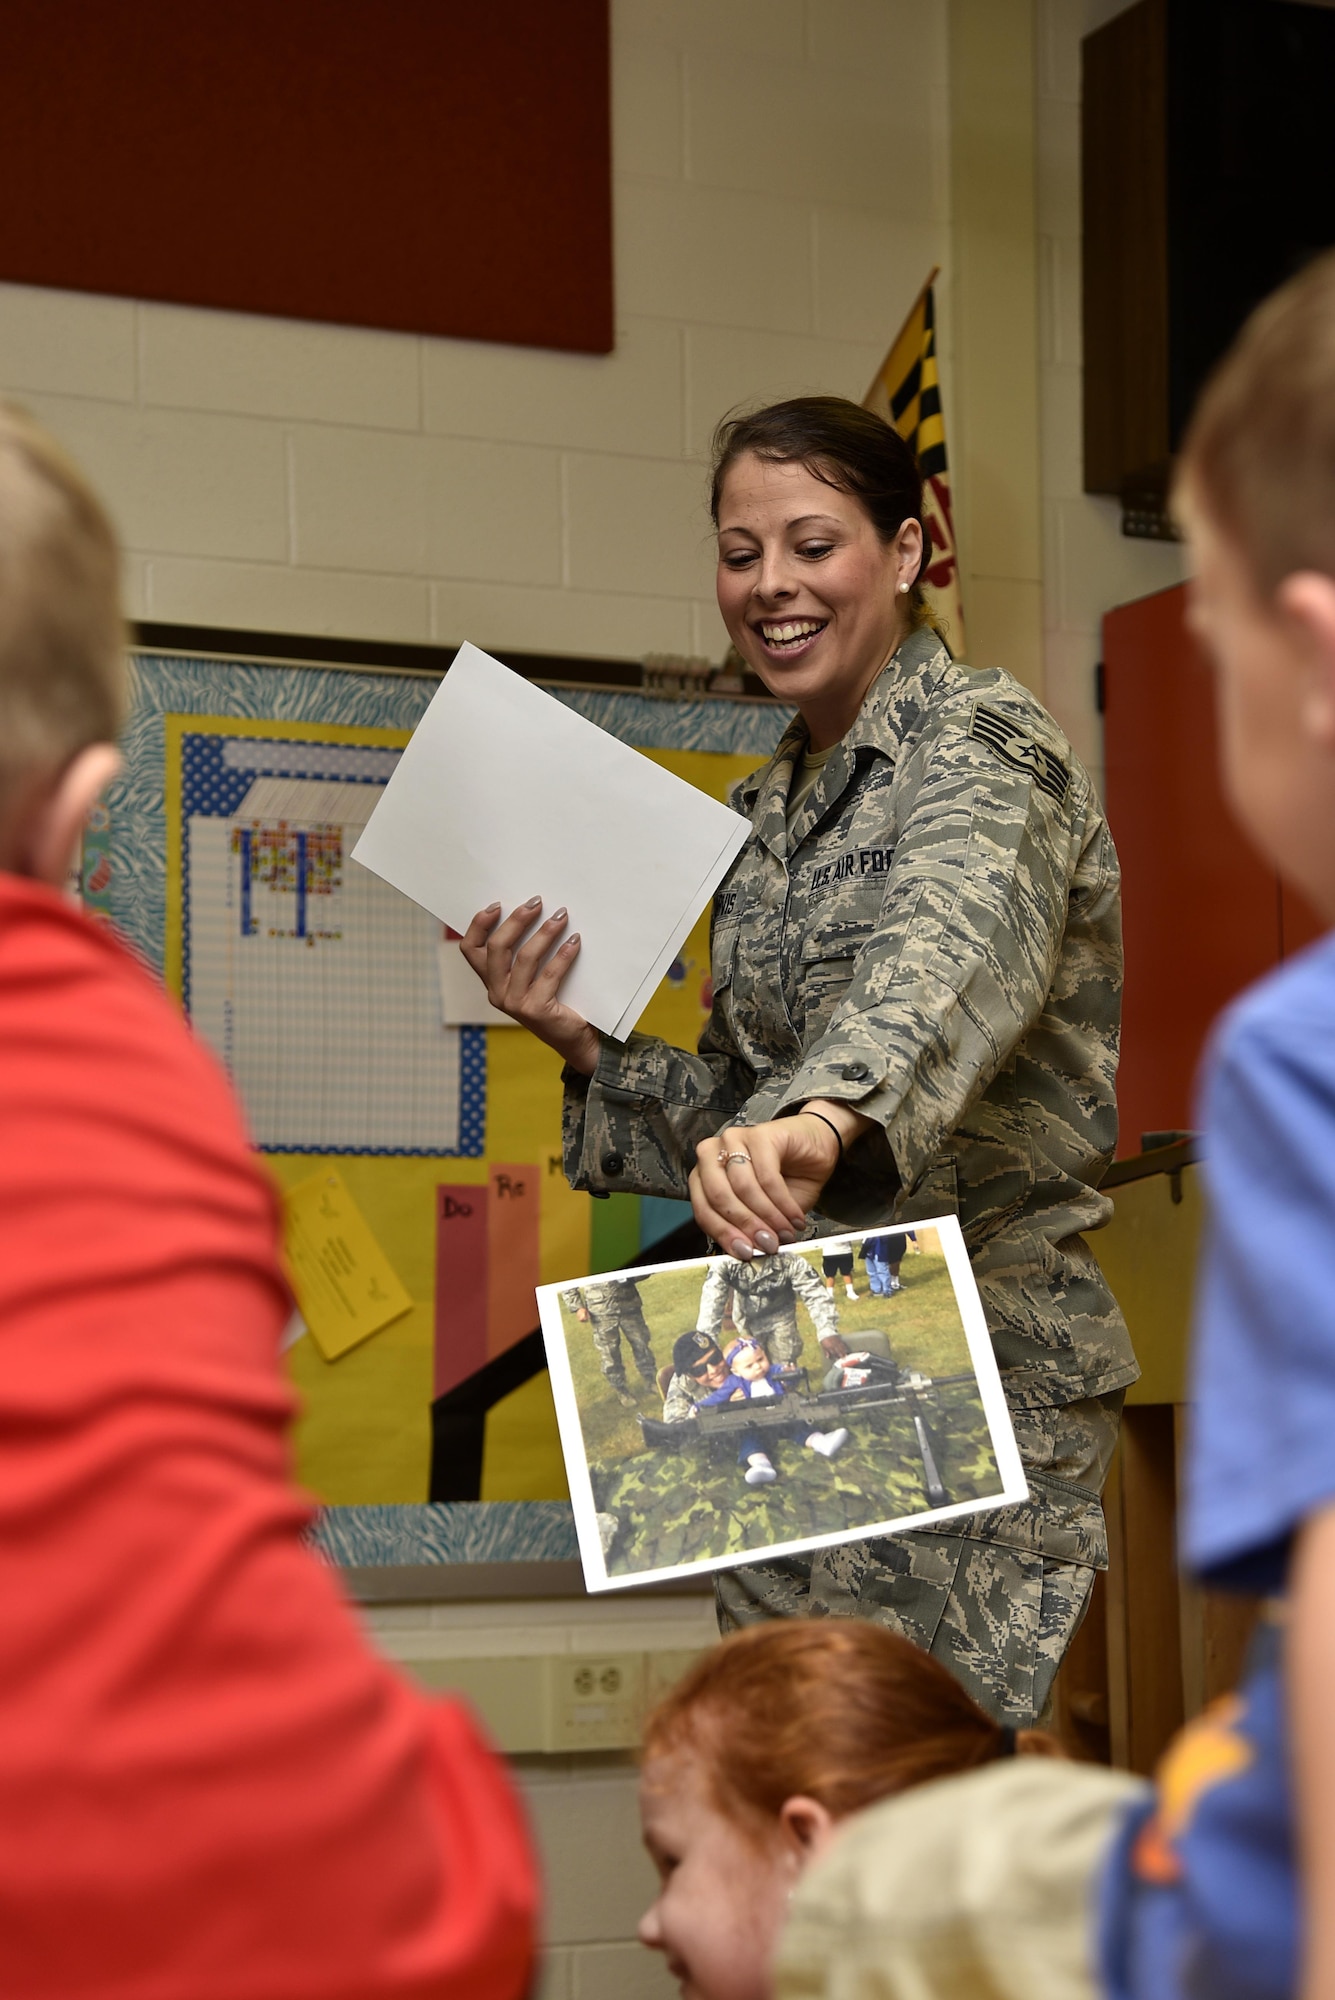 Air Force Staff Sgt. Miriam Y. Jarvis, 175th Force Support Squadron customer service NCO in charge, holds up a photo of herself and her daughter, Avery, June 6, 2017, during a career day presentation at Oliver Beach Elementary School, Middle River, Md.  Jarvis was asked to speak about her job to several classes, including her daughters. (U.S. Air National Guard photo by Airman Sarah M. McClanahan /Released)